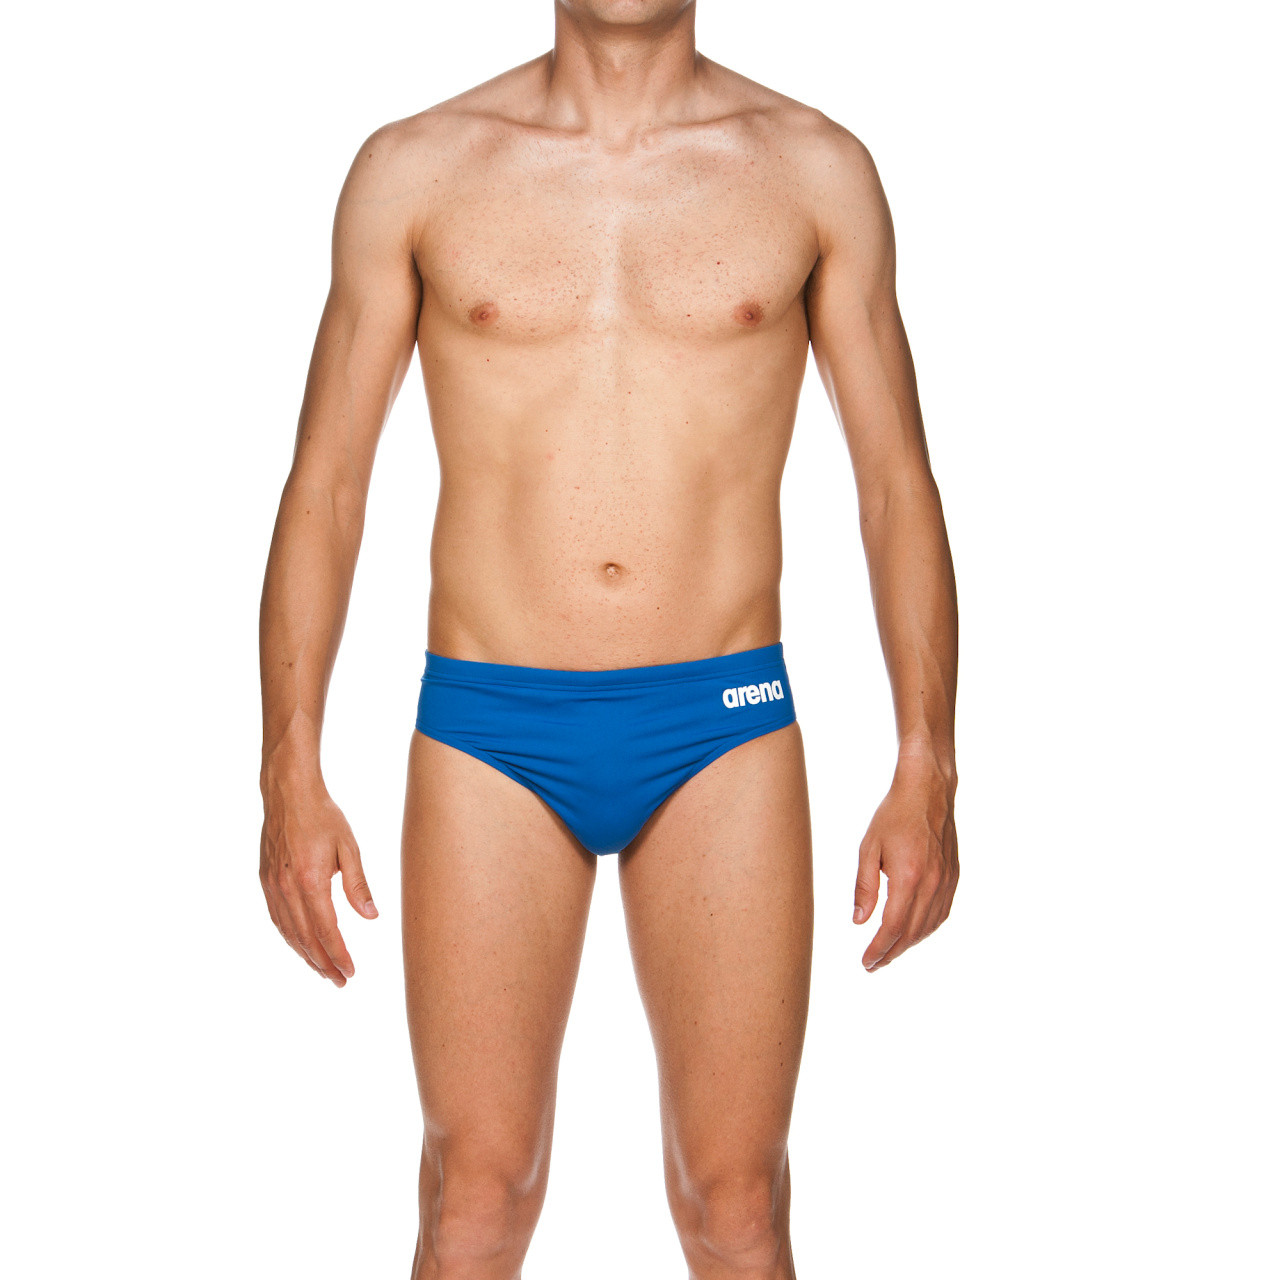 Плавки Arena M SOLID BRIEF 2A254-072